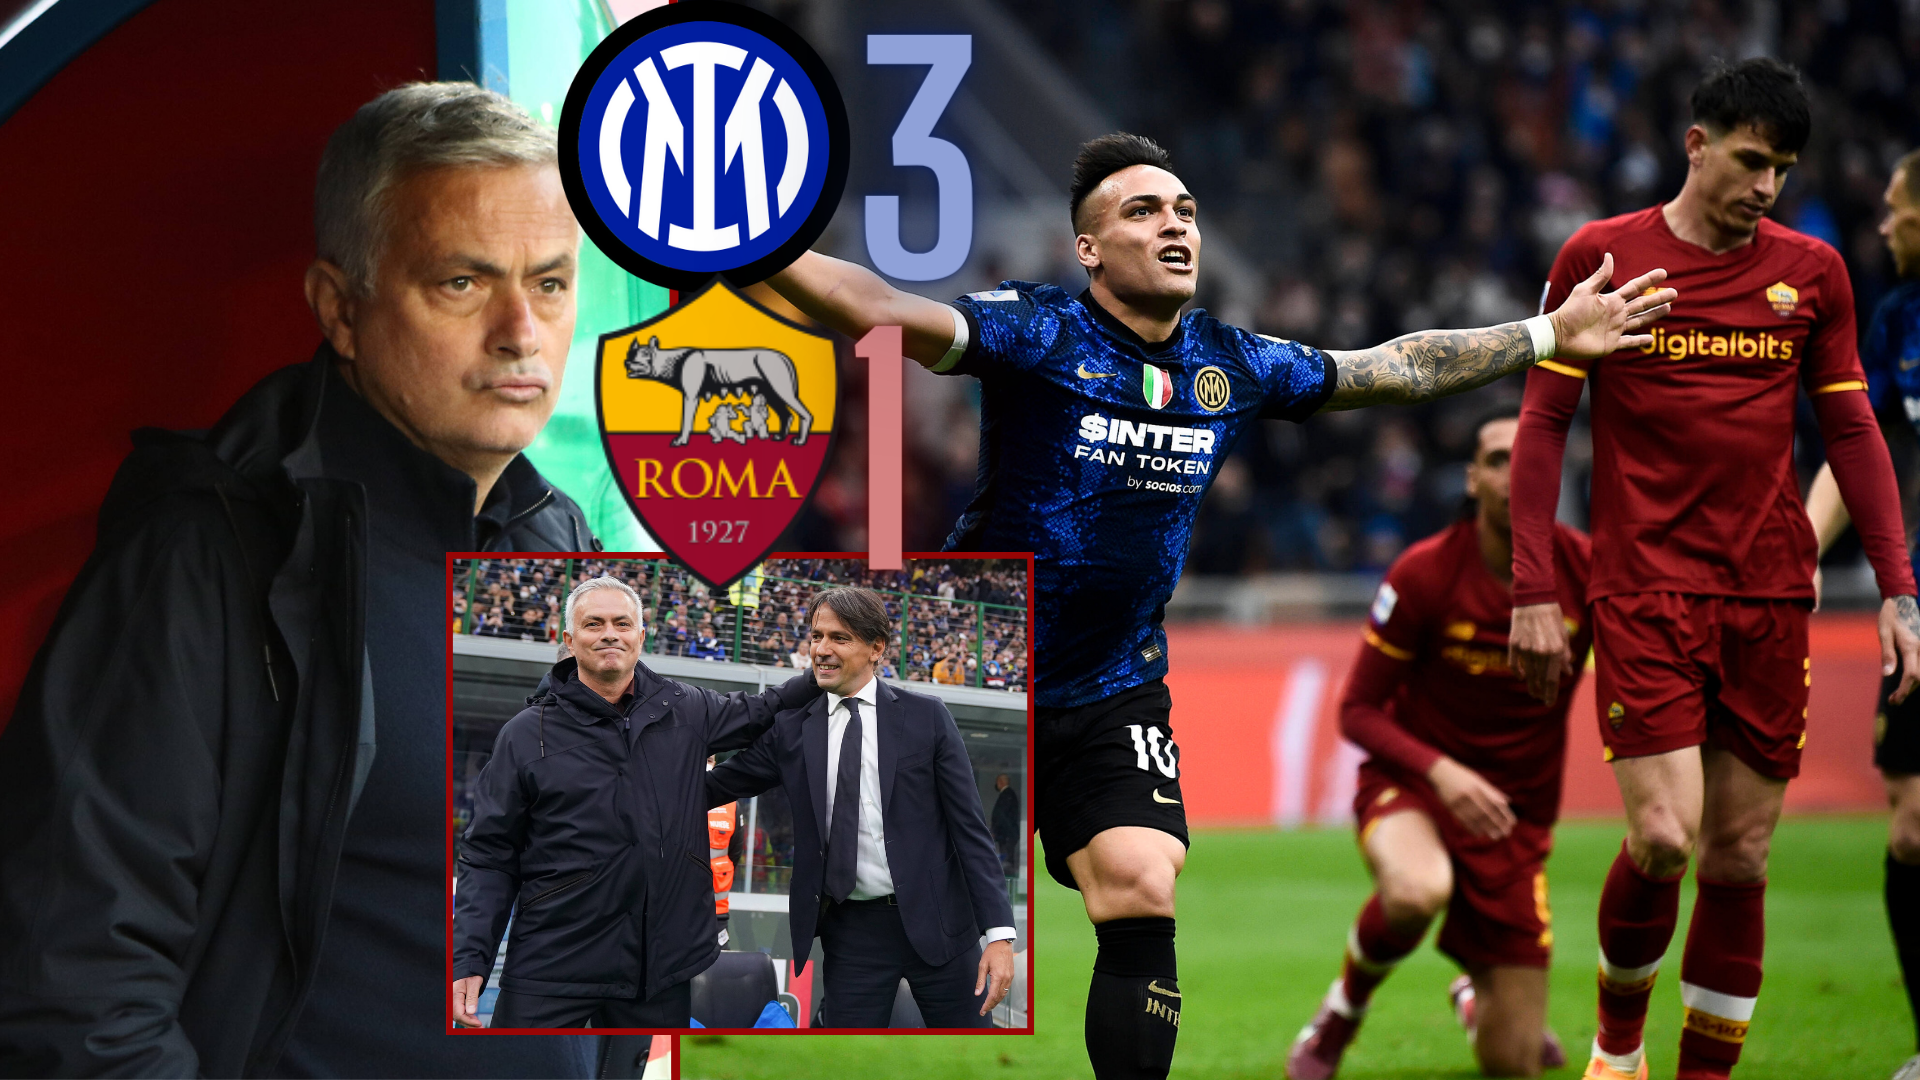 'I'd like them to win the league' - Mourinho tips Inter for back-to-back title success following Roma defeat